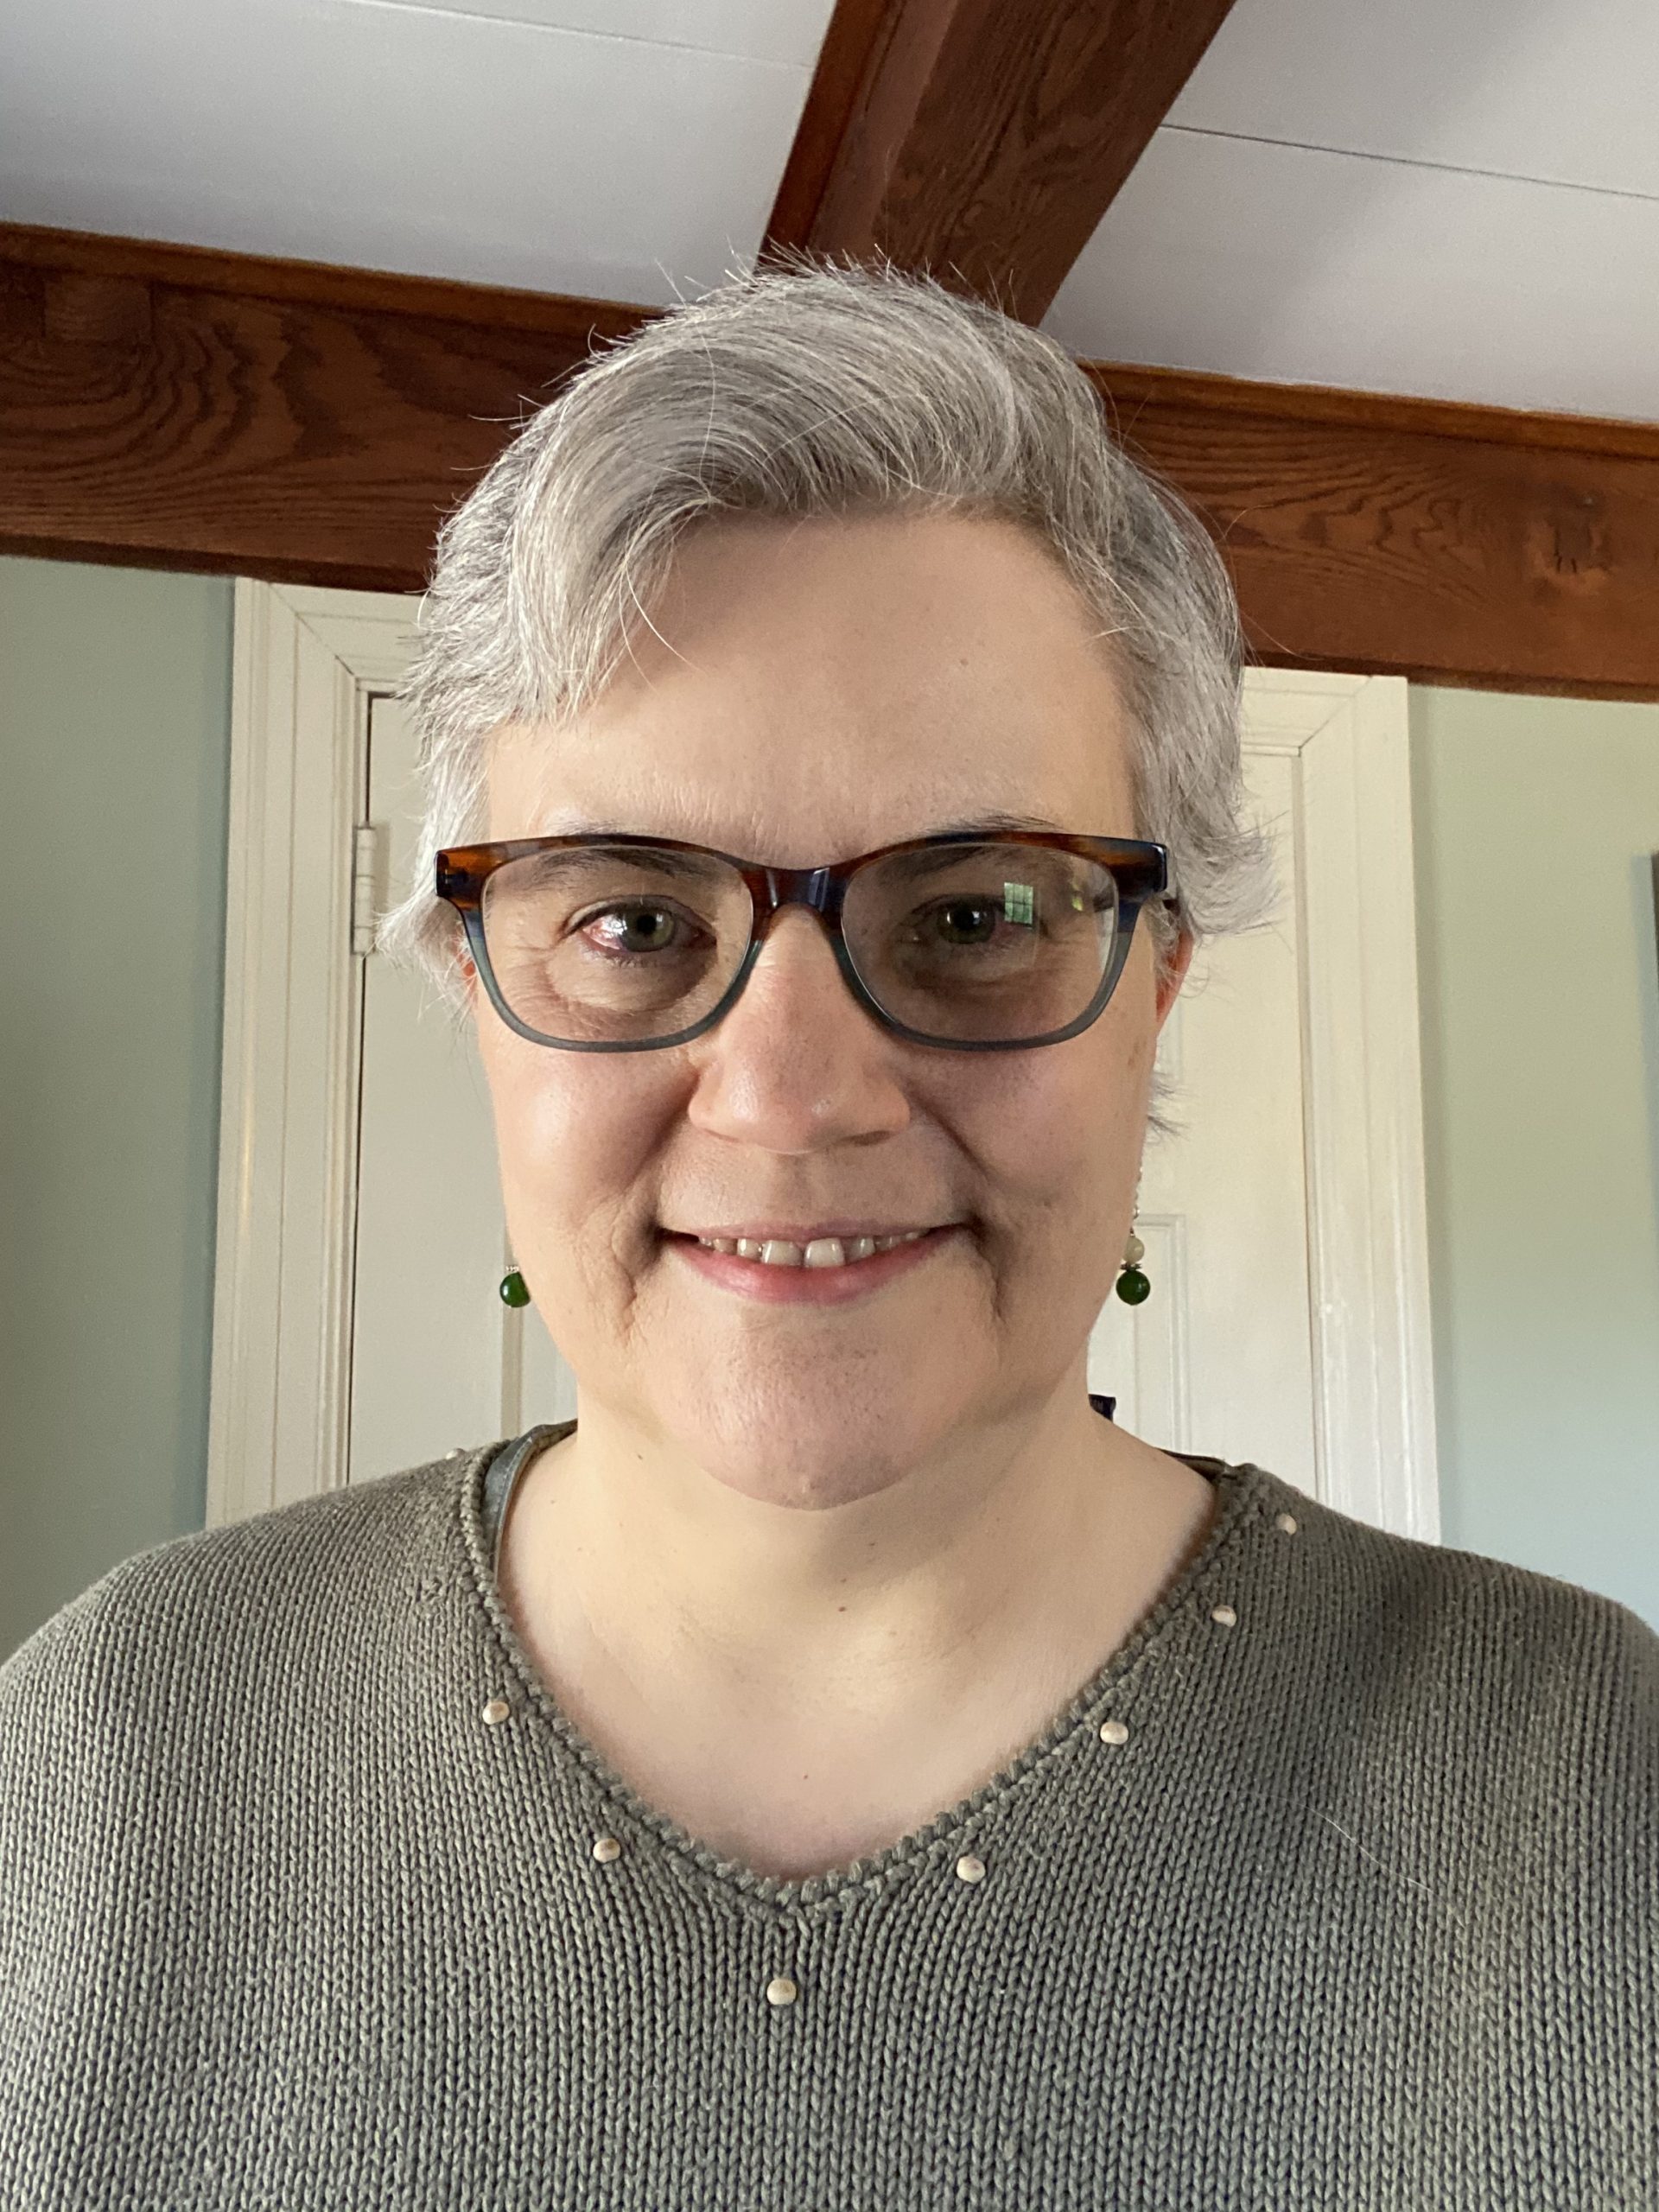 Woman with grey hair and glasses wearing a green top